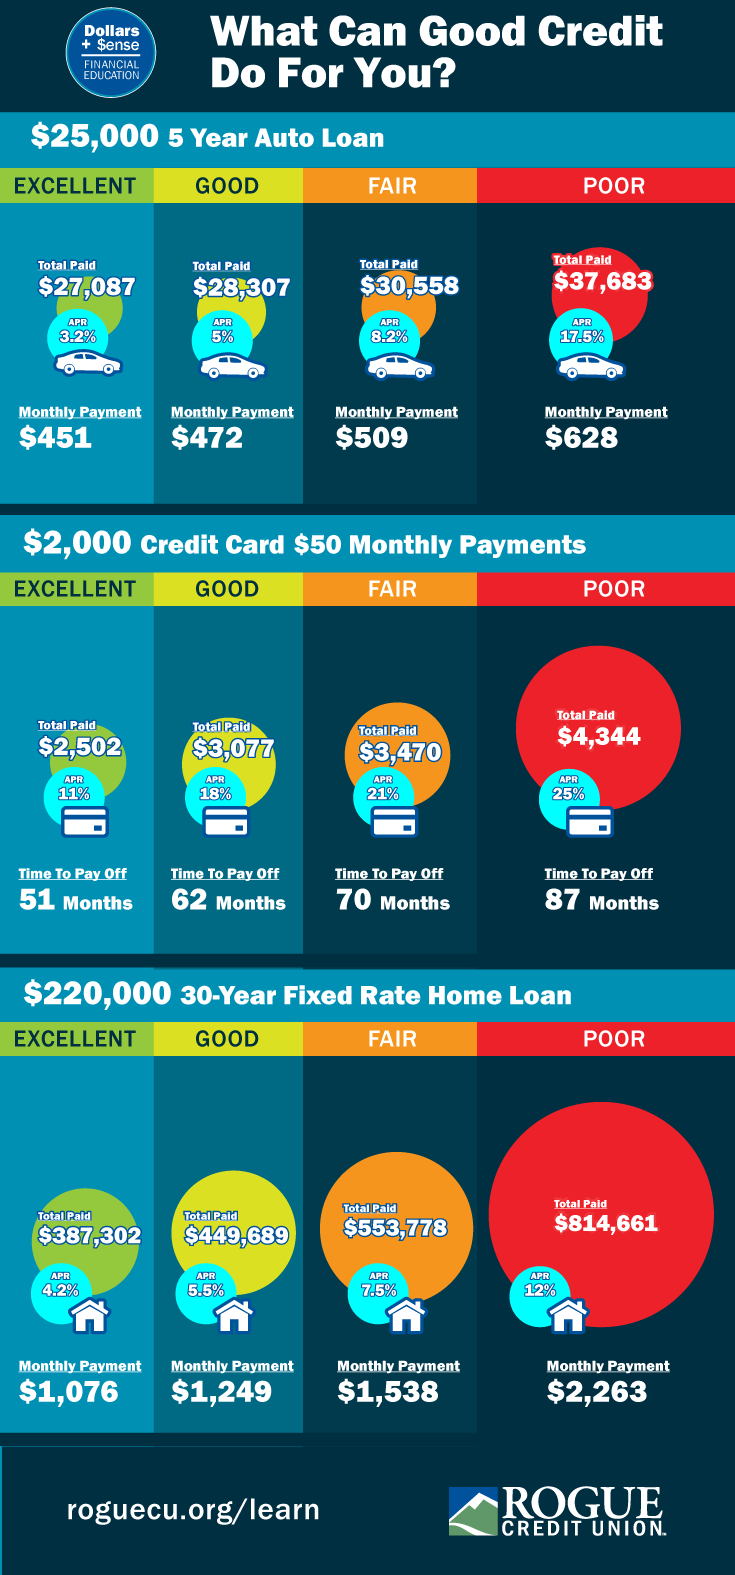 What Can Good Credit Do For You